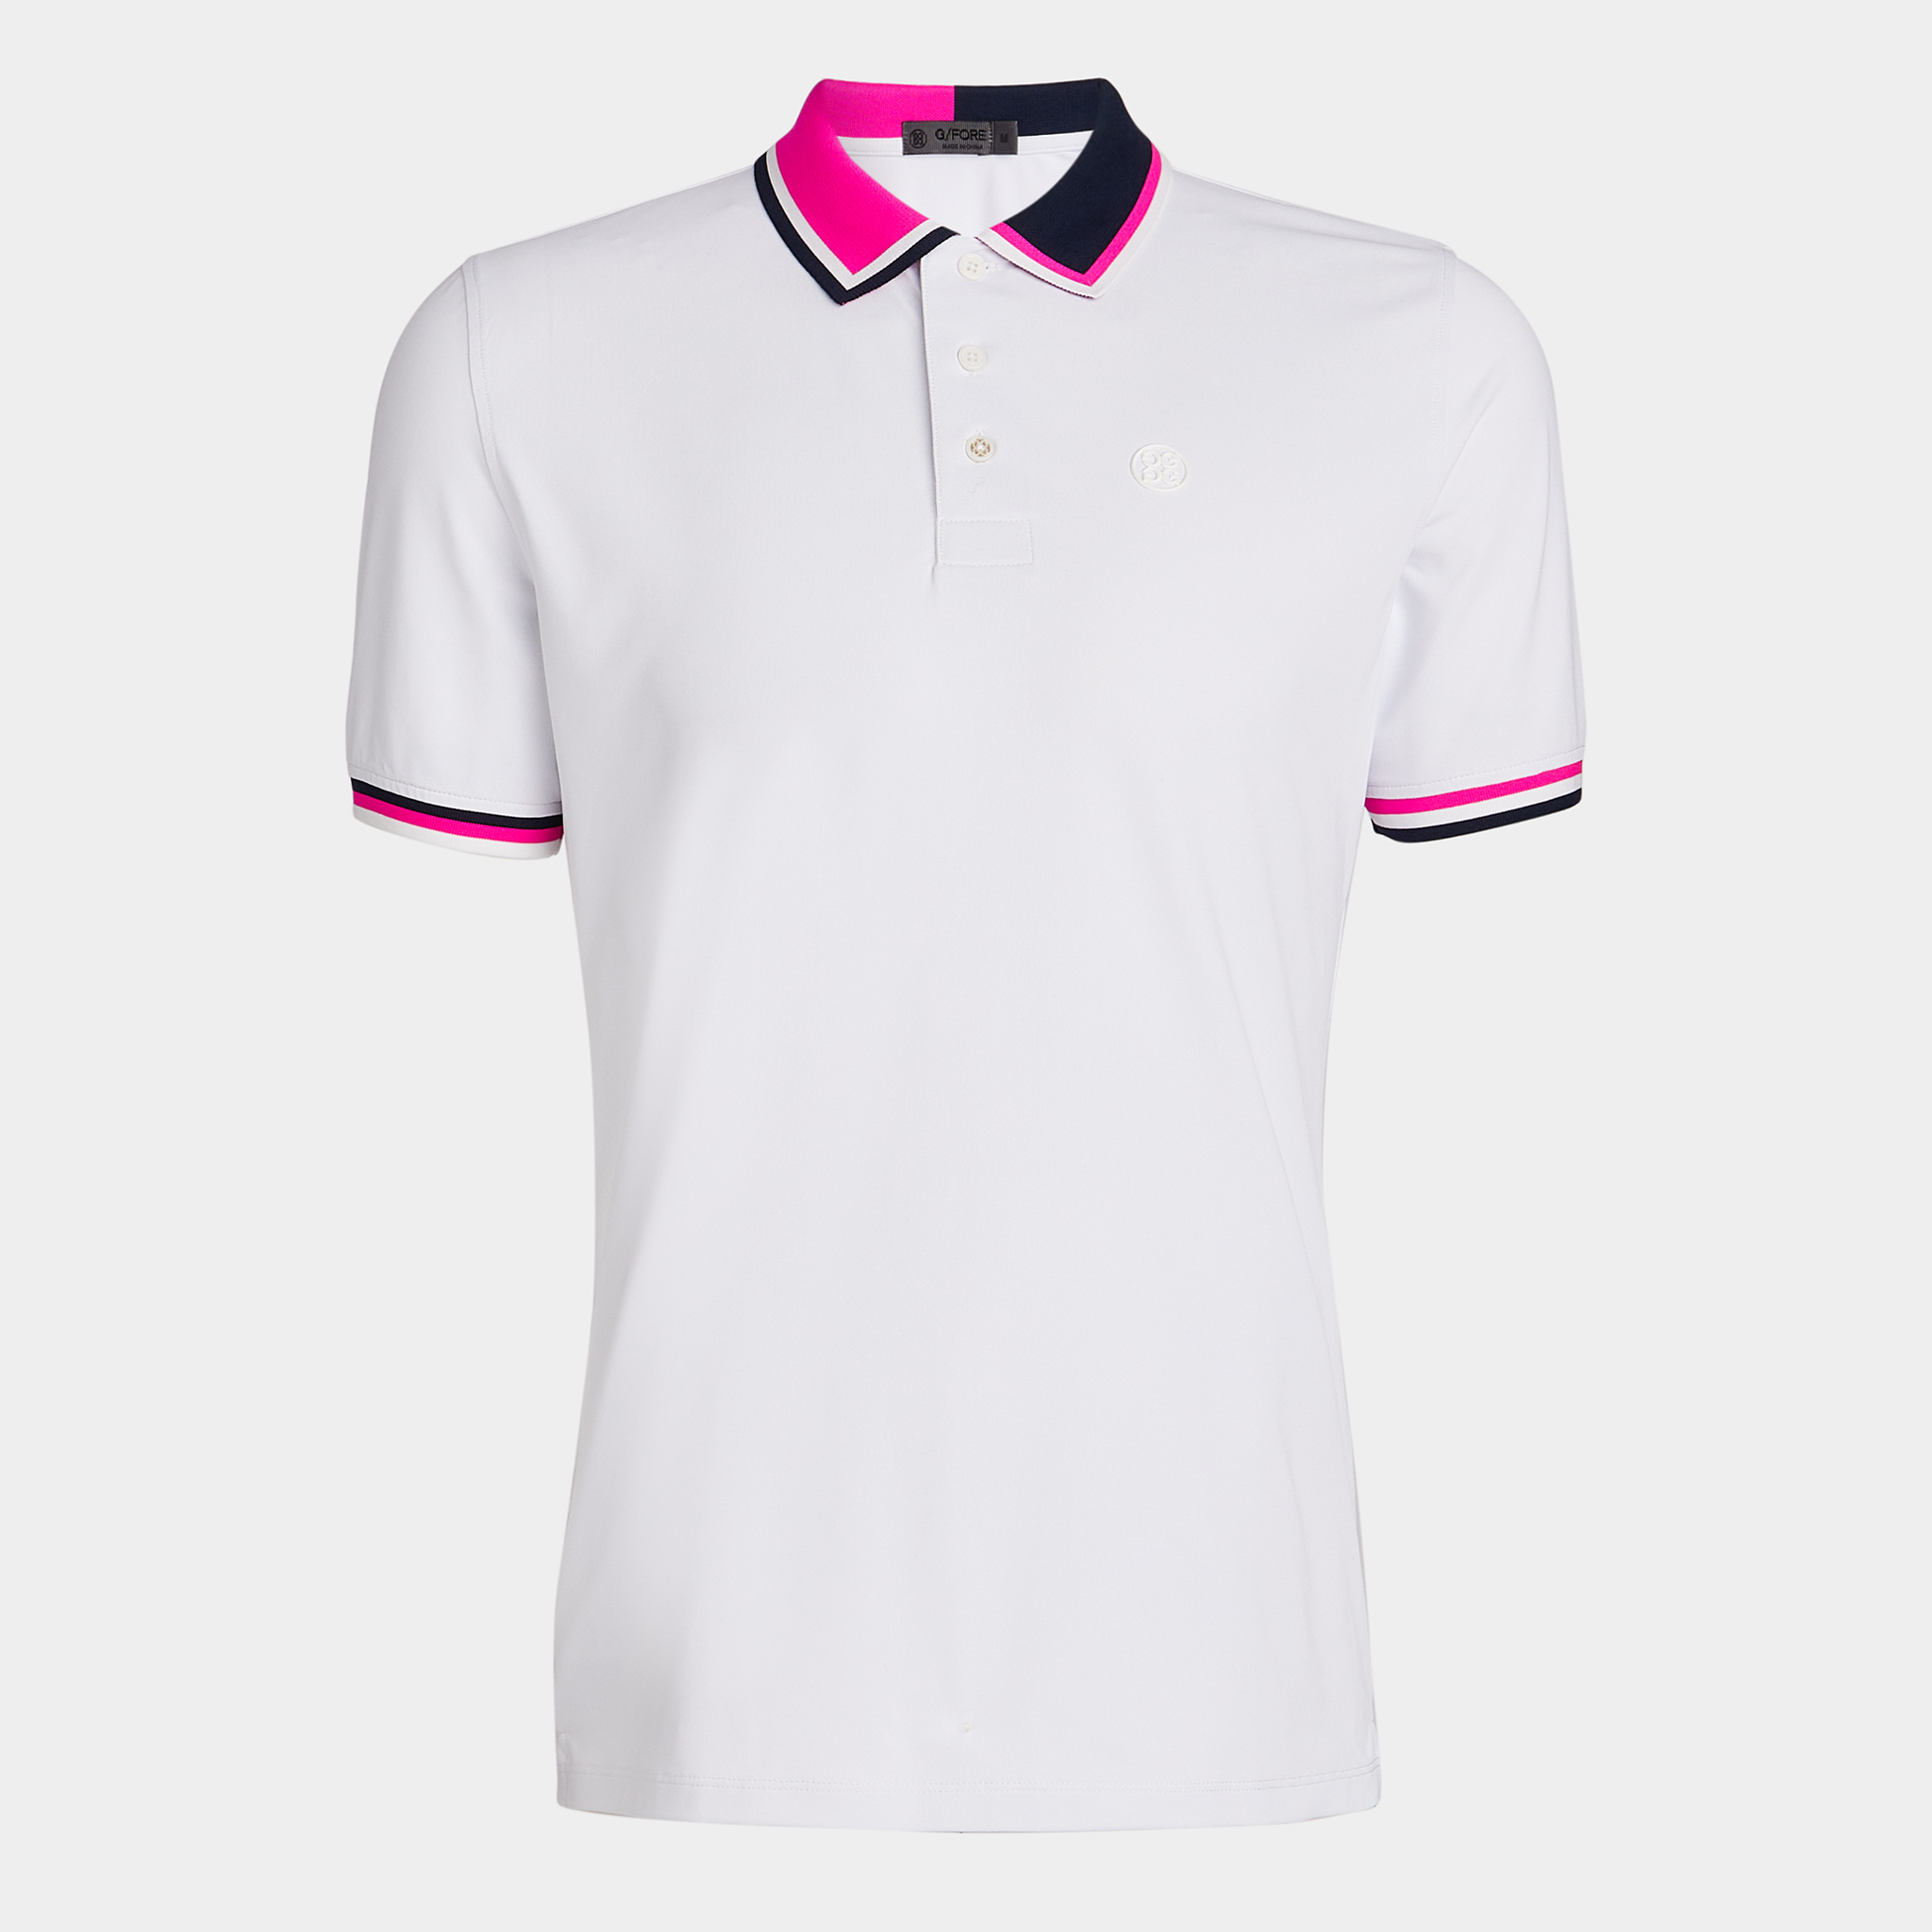 TWO TONE BANDED SLEEVE TECH PIQUÉ POLO – G/FORE